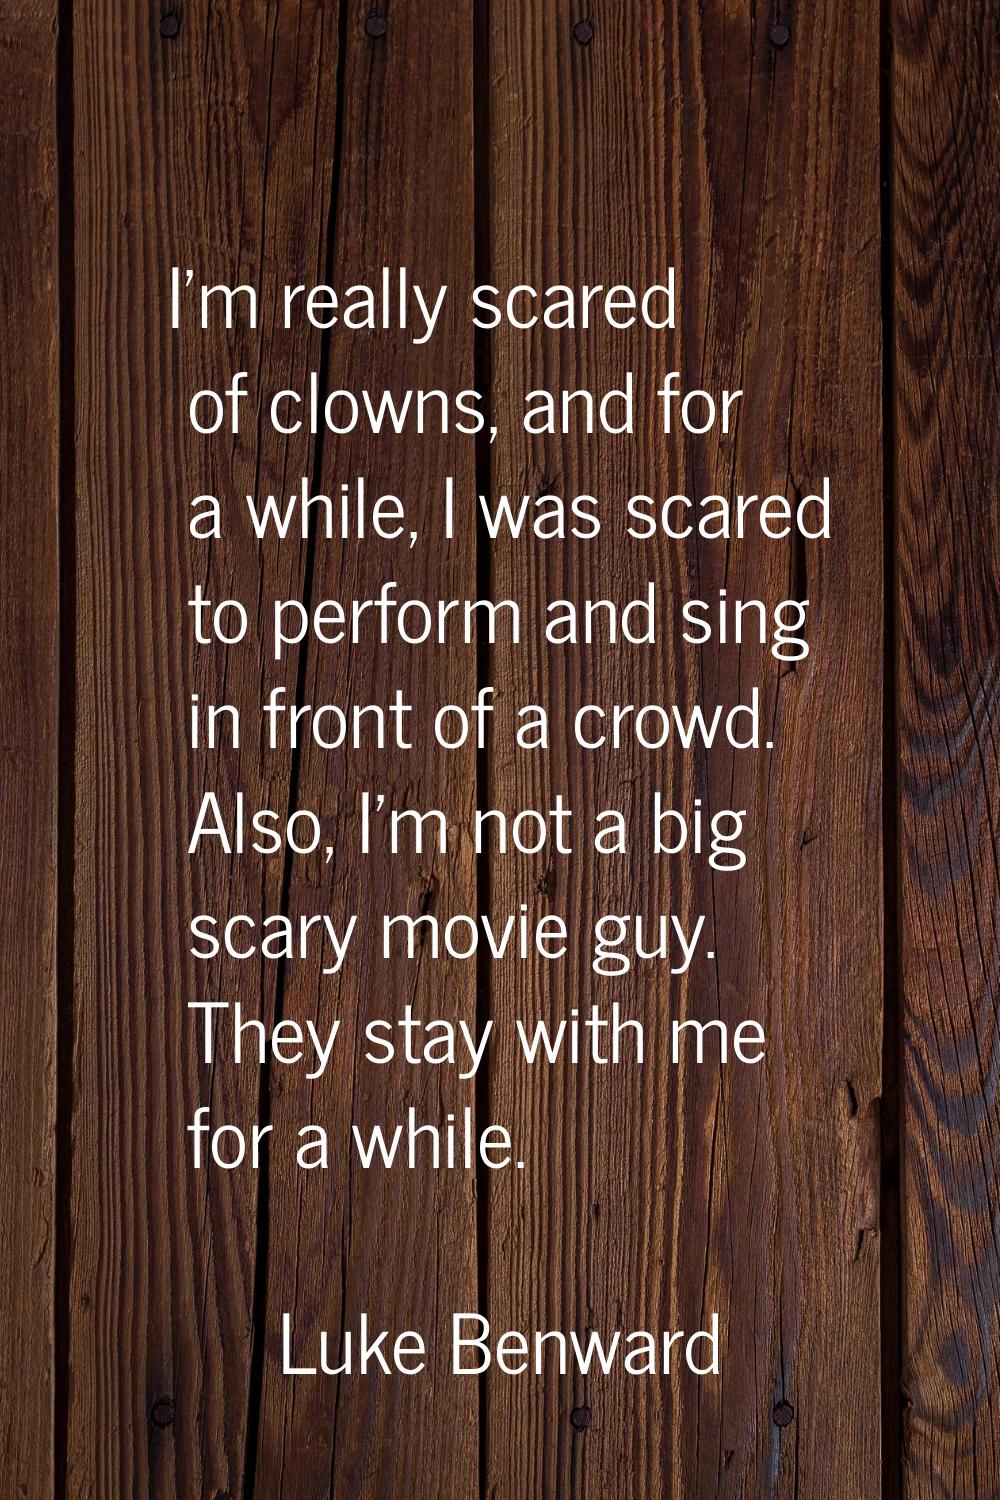 I'm really scared of clowns, and for a while, I was scared to perform and sing in front of a crowd.